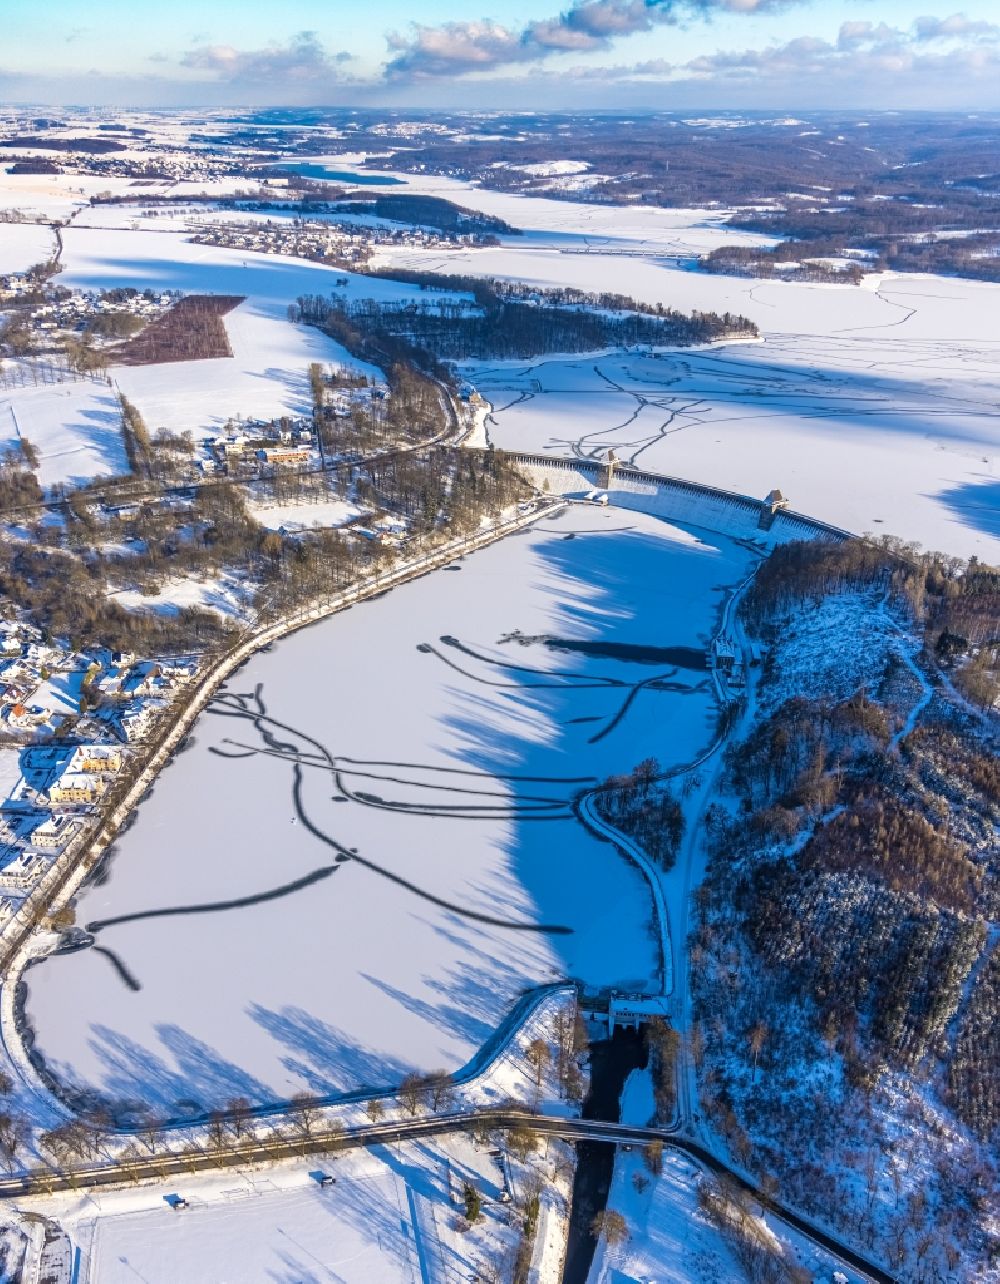 Günne from the bird's eye view: Wintry snowy shore areas at the lake Moehnetalsperre in the district Guenne in Moehnesee in the state North Rhine-Westphalia, Germany